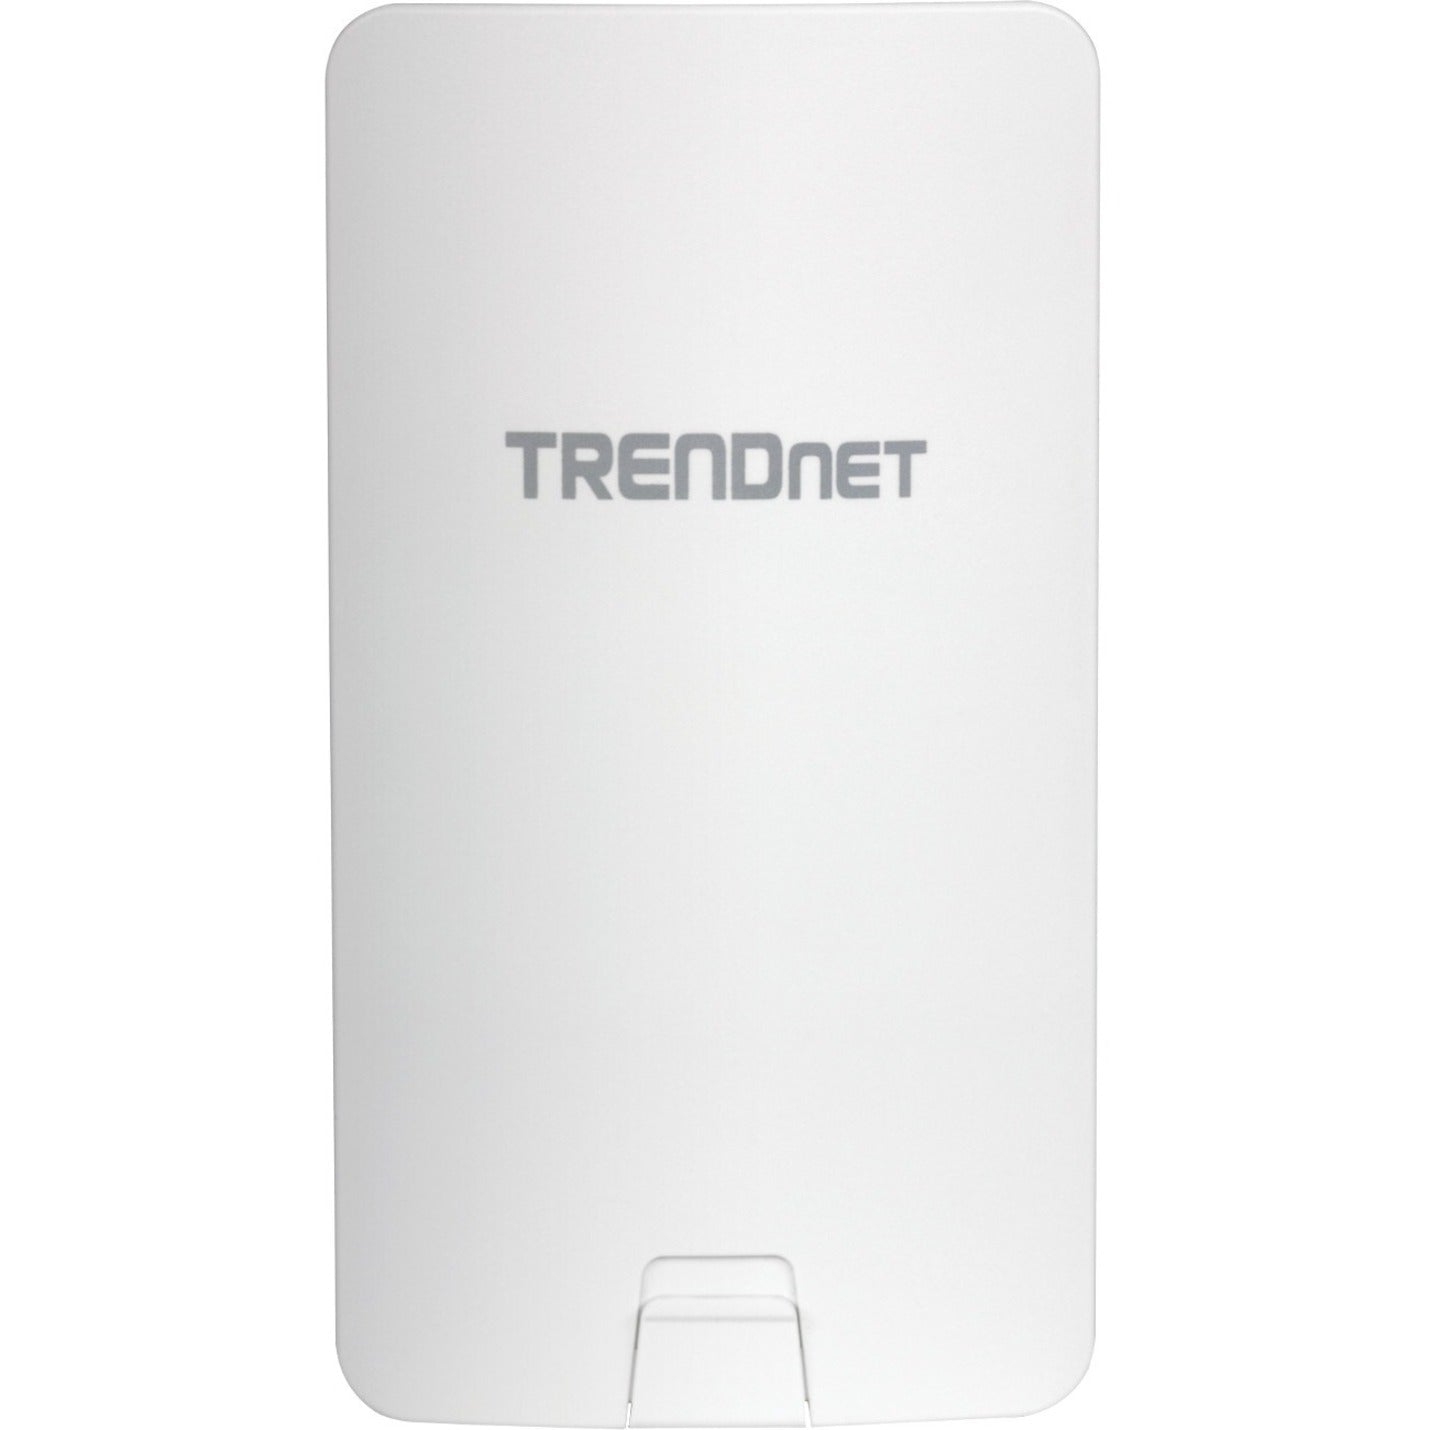 TRENDnet 14 DBI WiFi AC867 Outdoor Directional Poe Access Point; 14 DBI Directional Antennas; for Point-to-Point WiFi Bridging Applications; 5GHz; AC867; TEW-840APBO